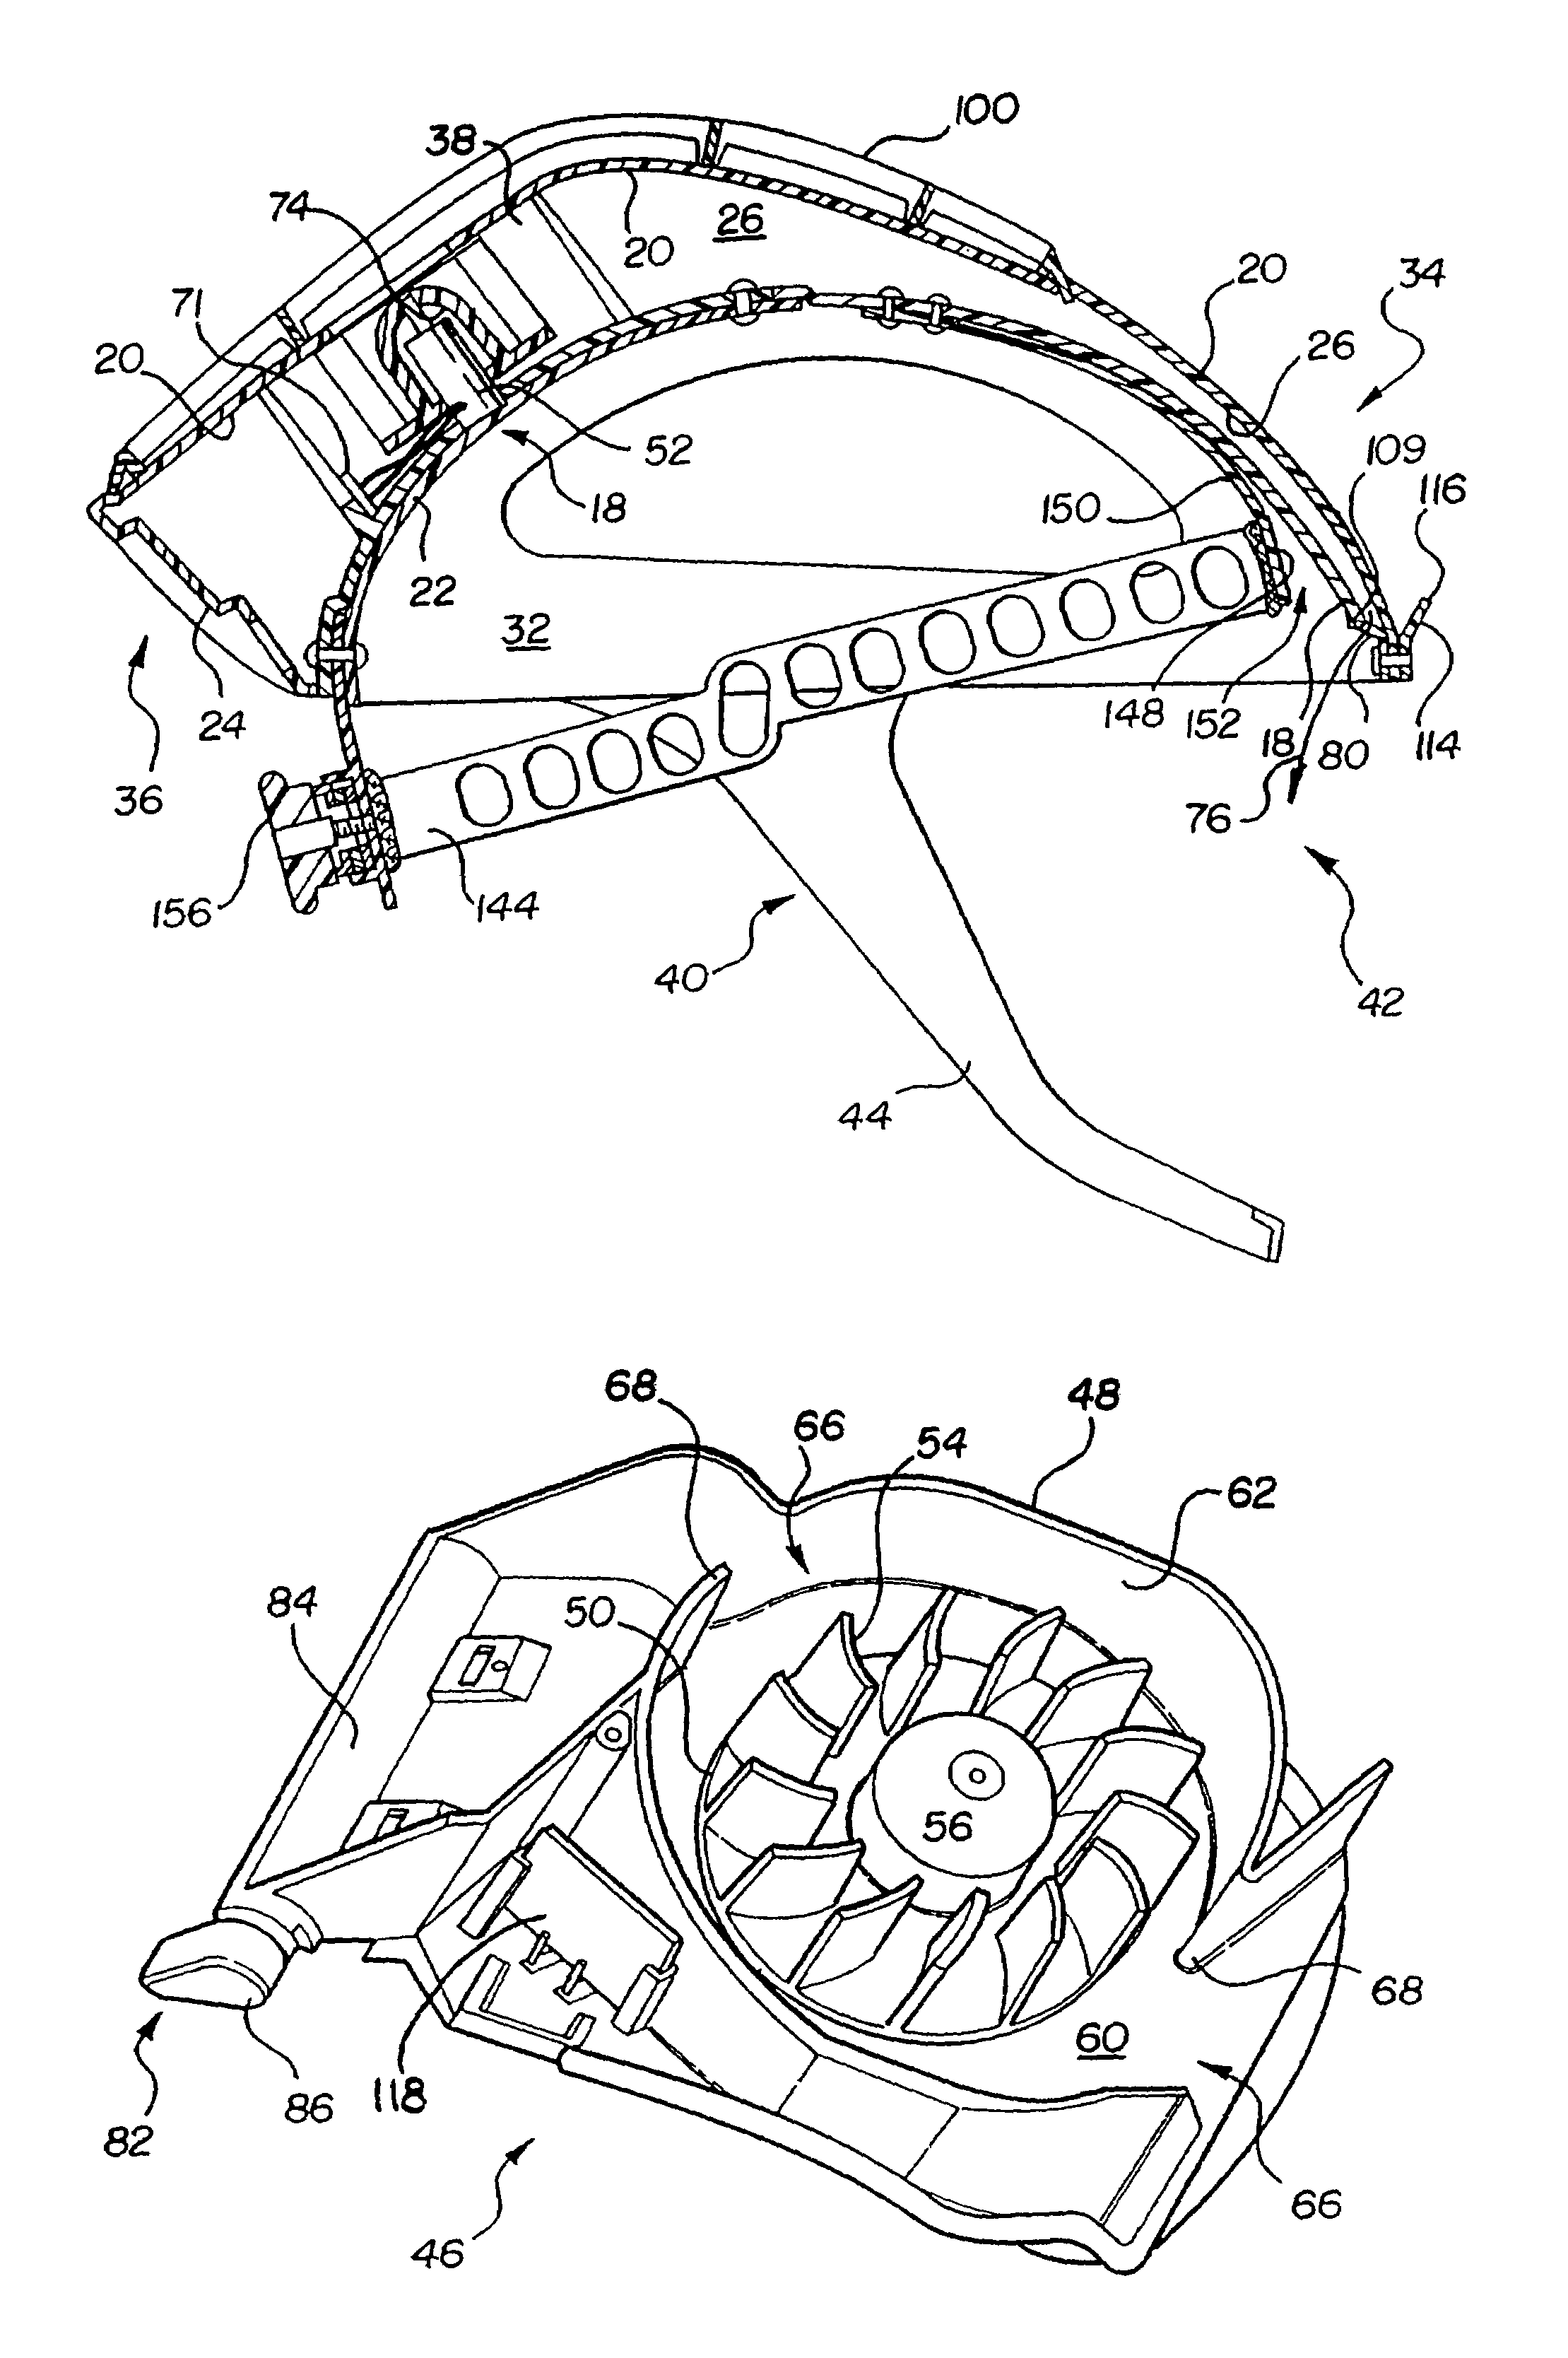 Air filtration system including a helmet assembly